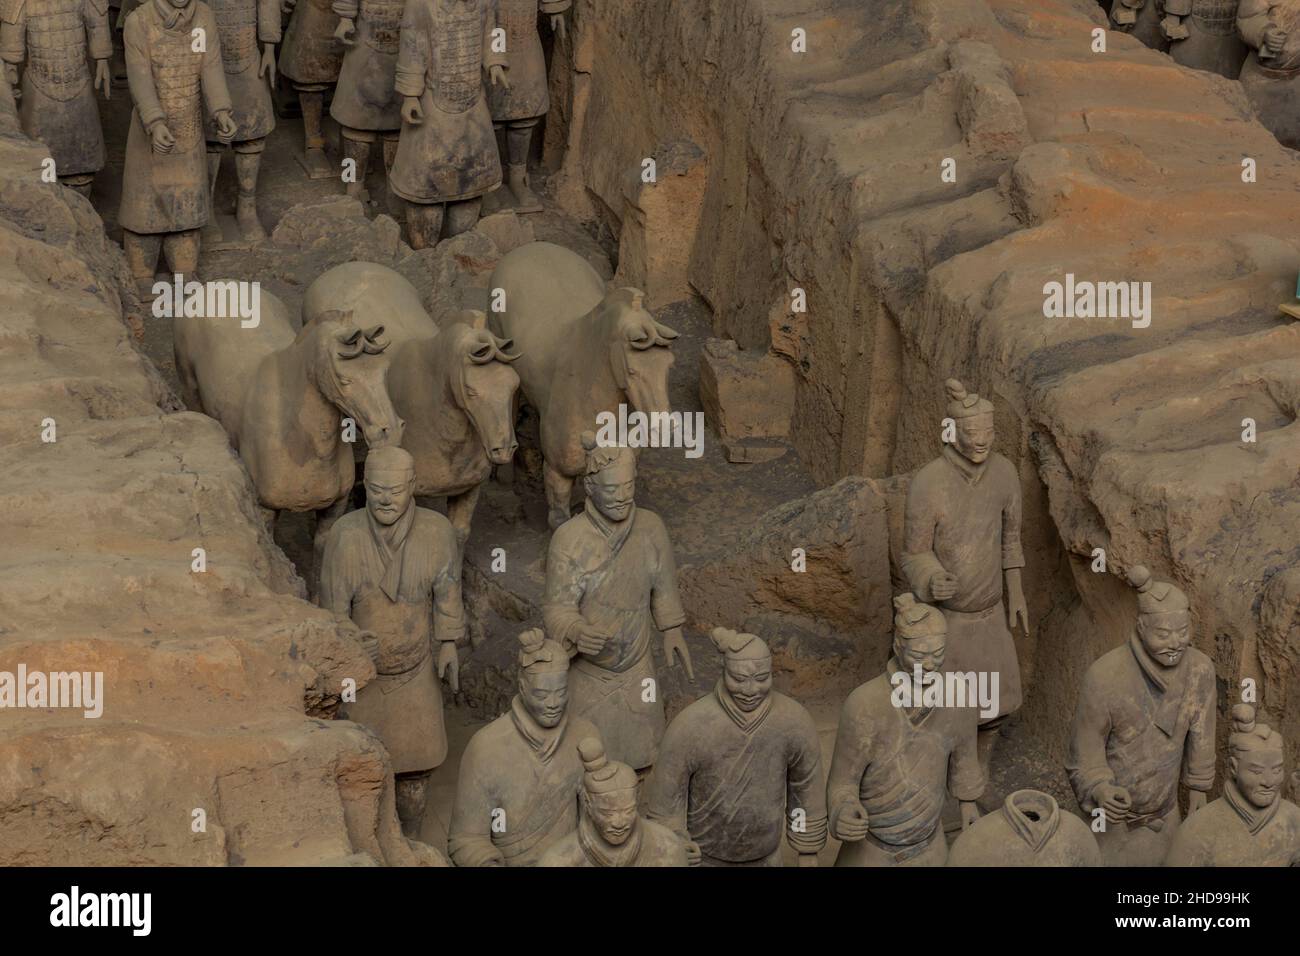 Soldiers with horses in the Pit 1 of the Army of Terracotta Warriors near Xi'an, Shaanxi province, China Stock Photo